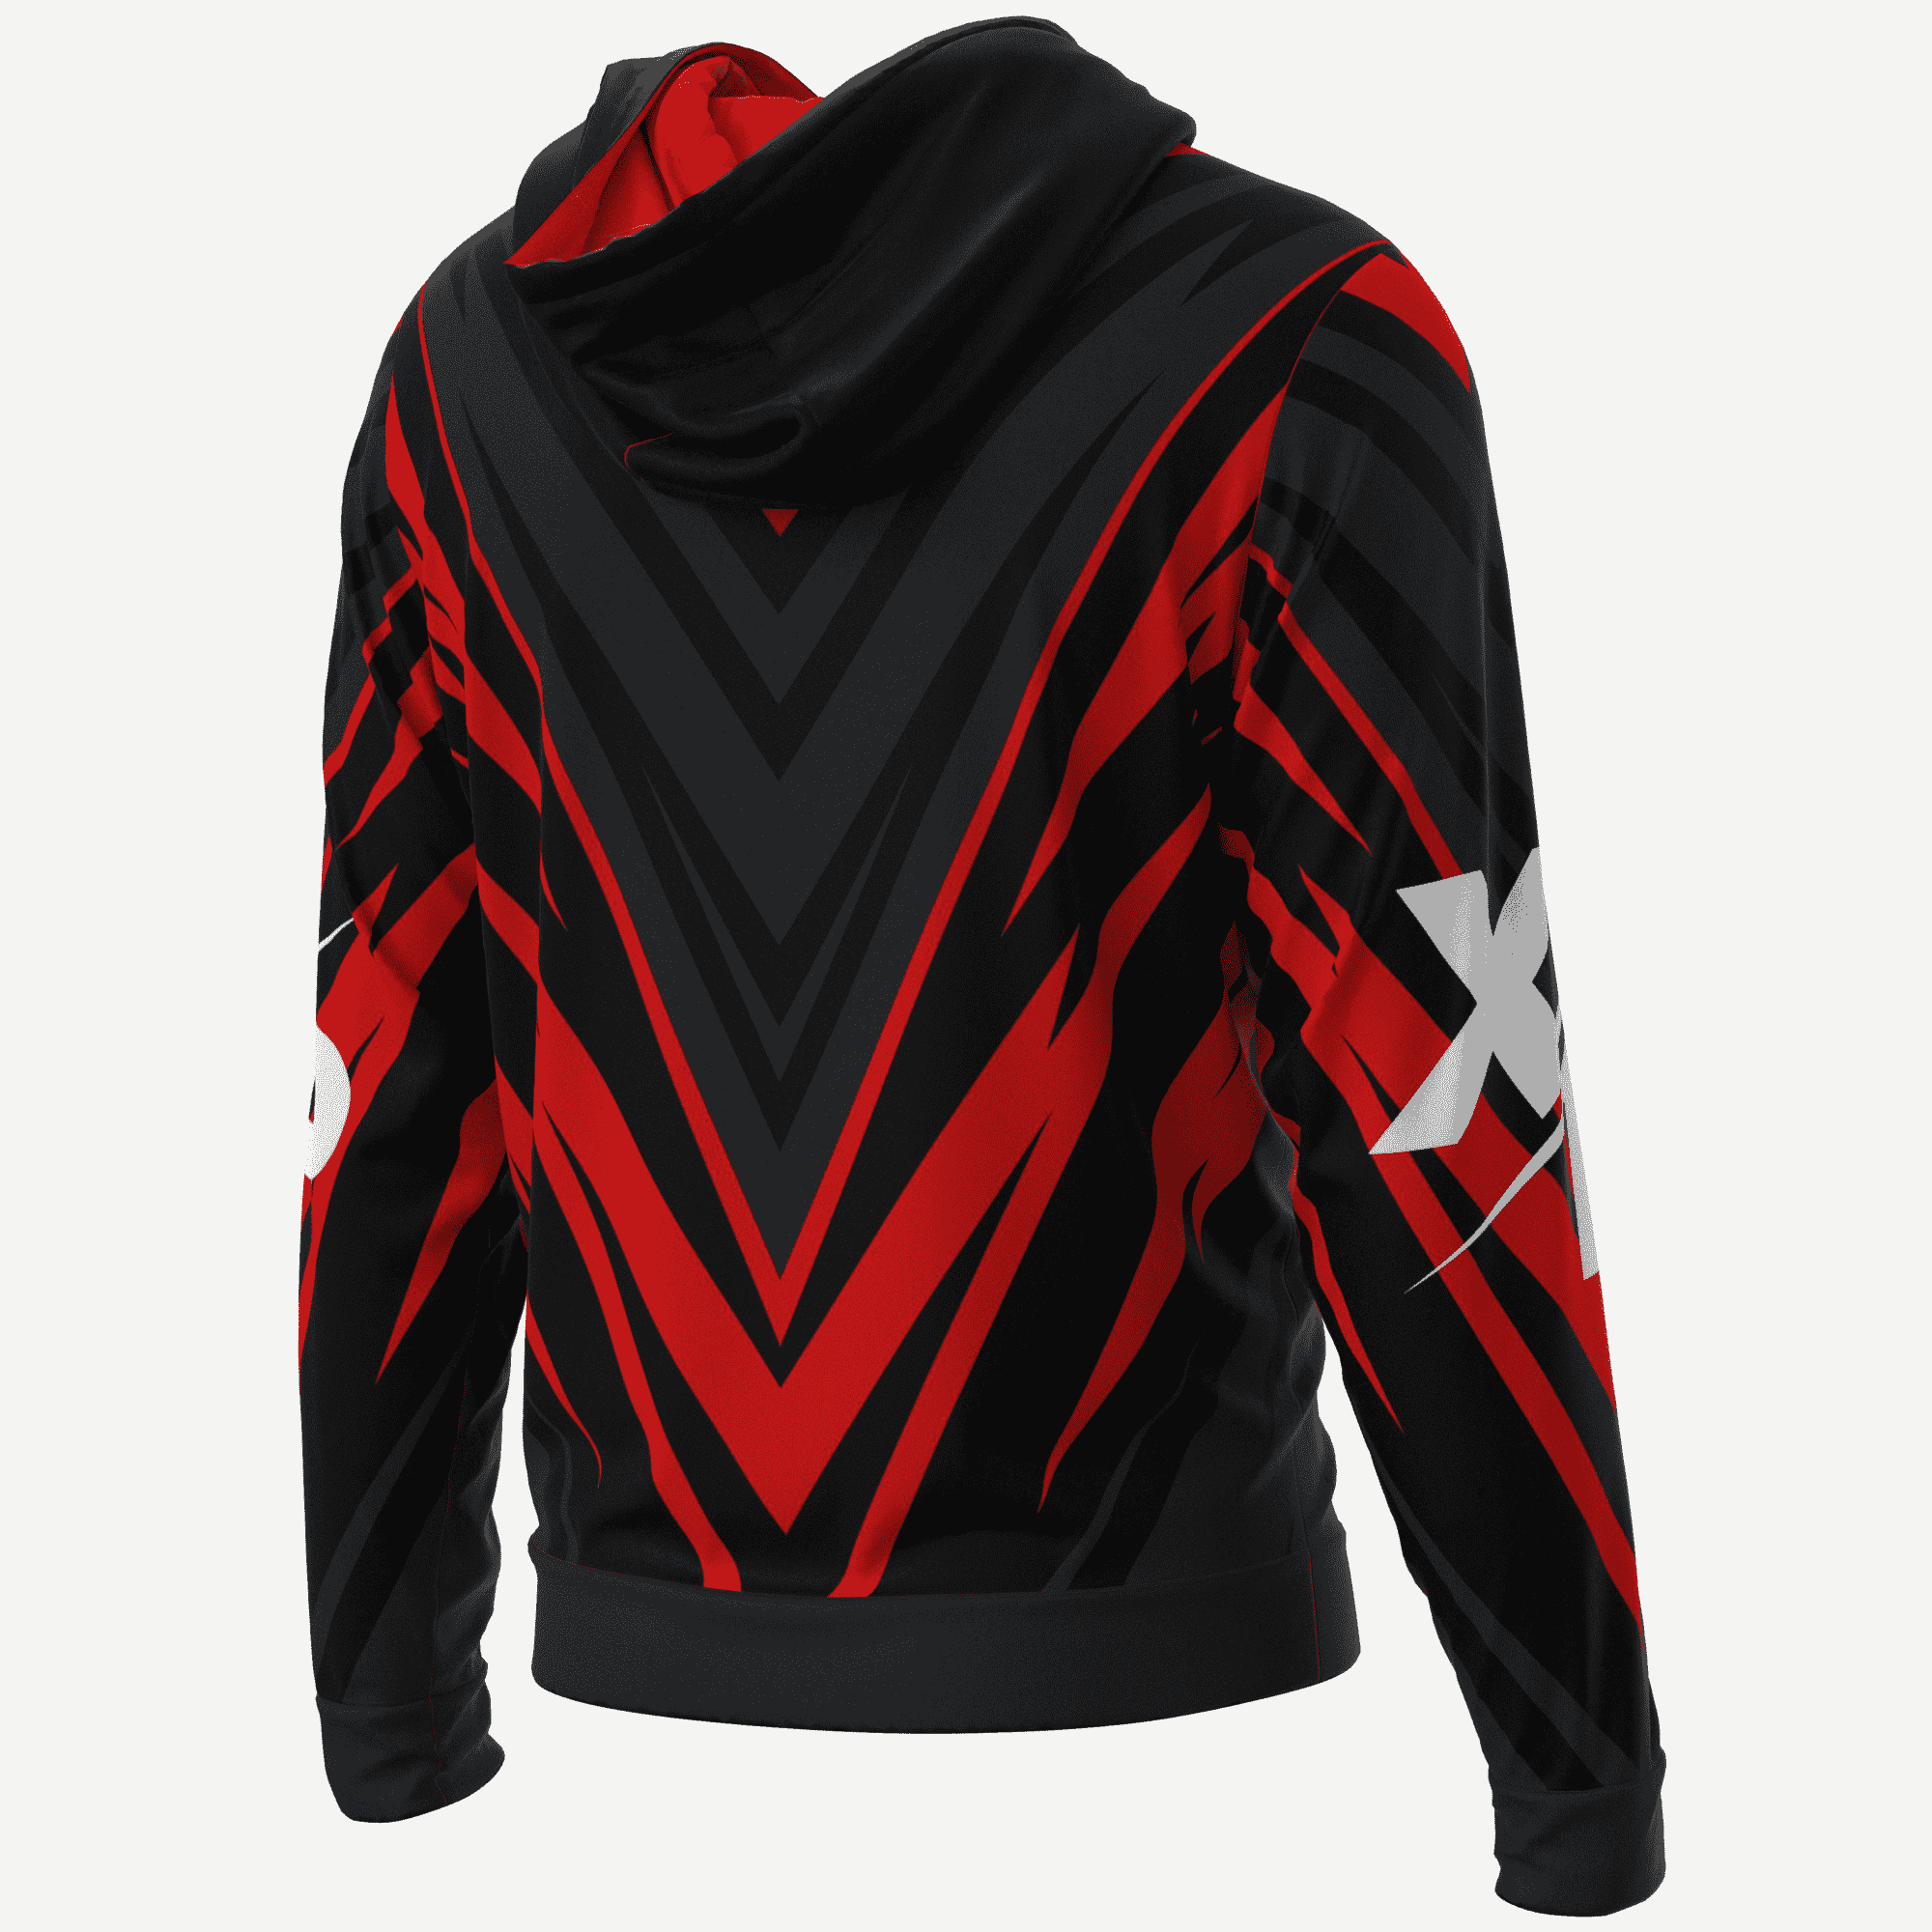 XP Sports Fully Sublimated Super Soft Hoodie in Red-Grey Xtreme Pro Apparel